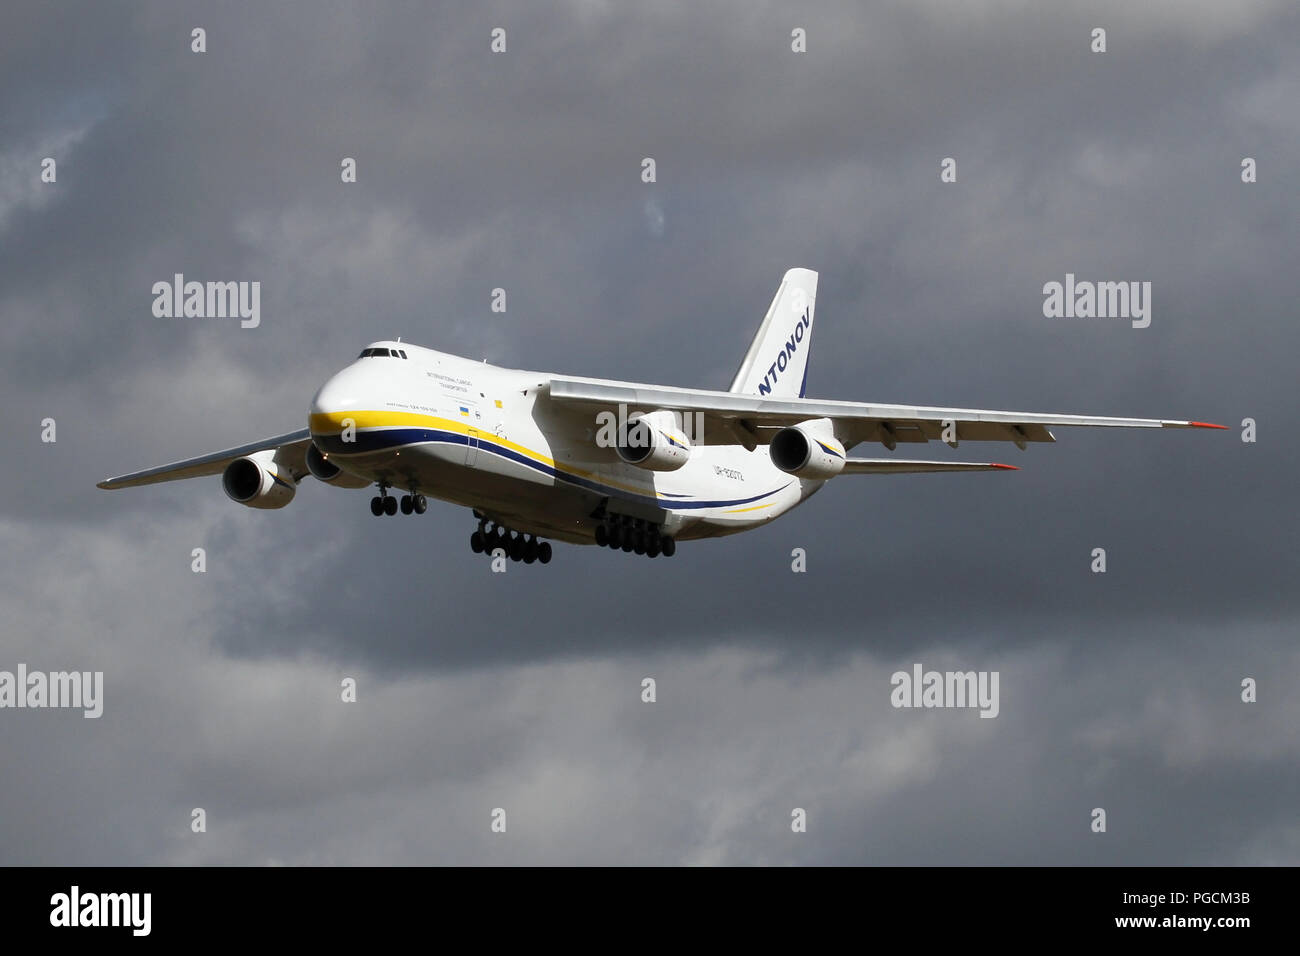 Antonov Airlines An-124 on approach into Wattisham Airfield, Suffolk. This large cargo aircraft is returning AAC Apaches helicopters from the USA. Stock Photo